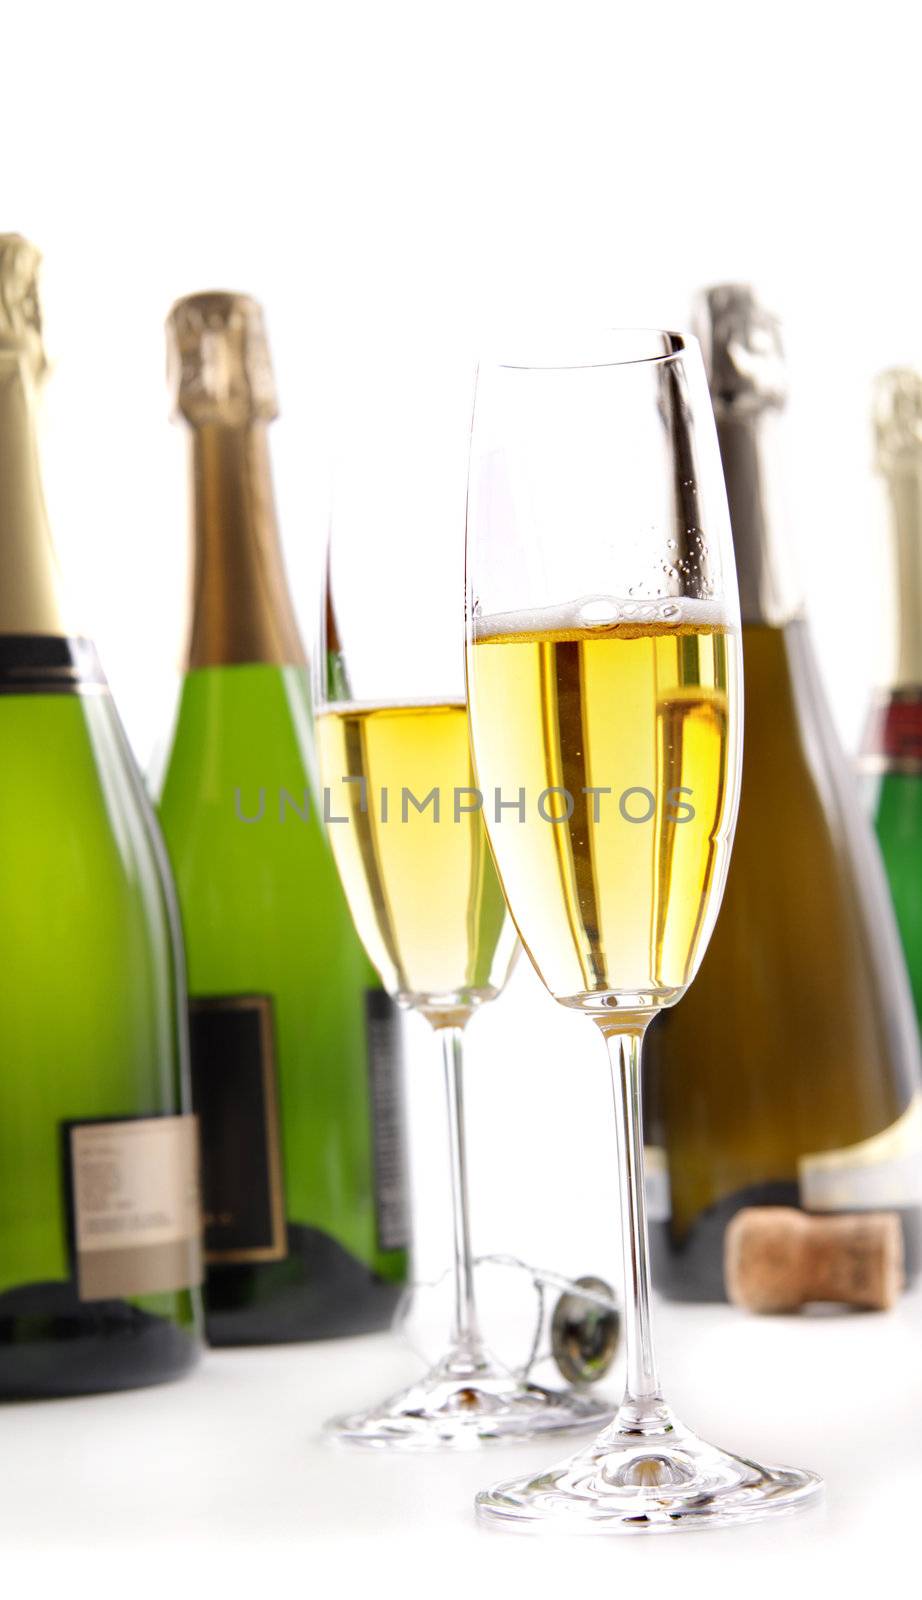 Glasses of champagne with bottles on white background